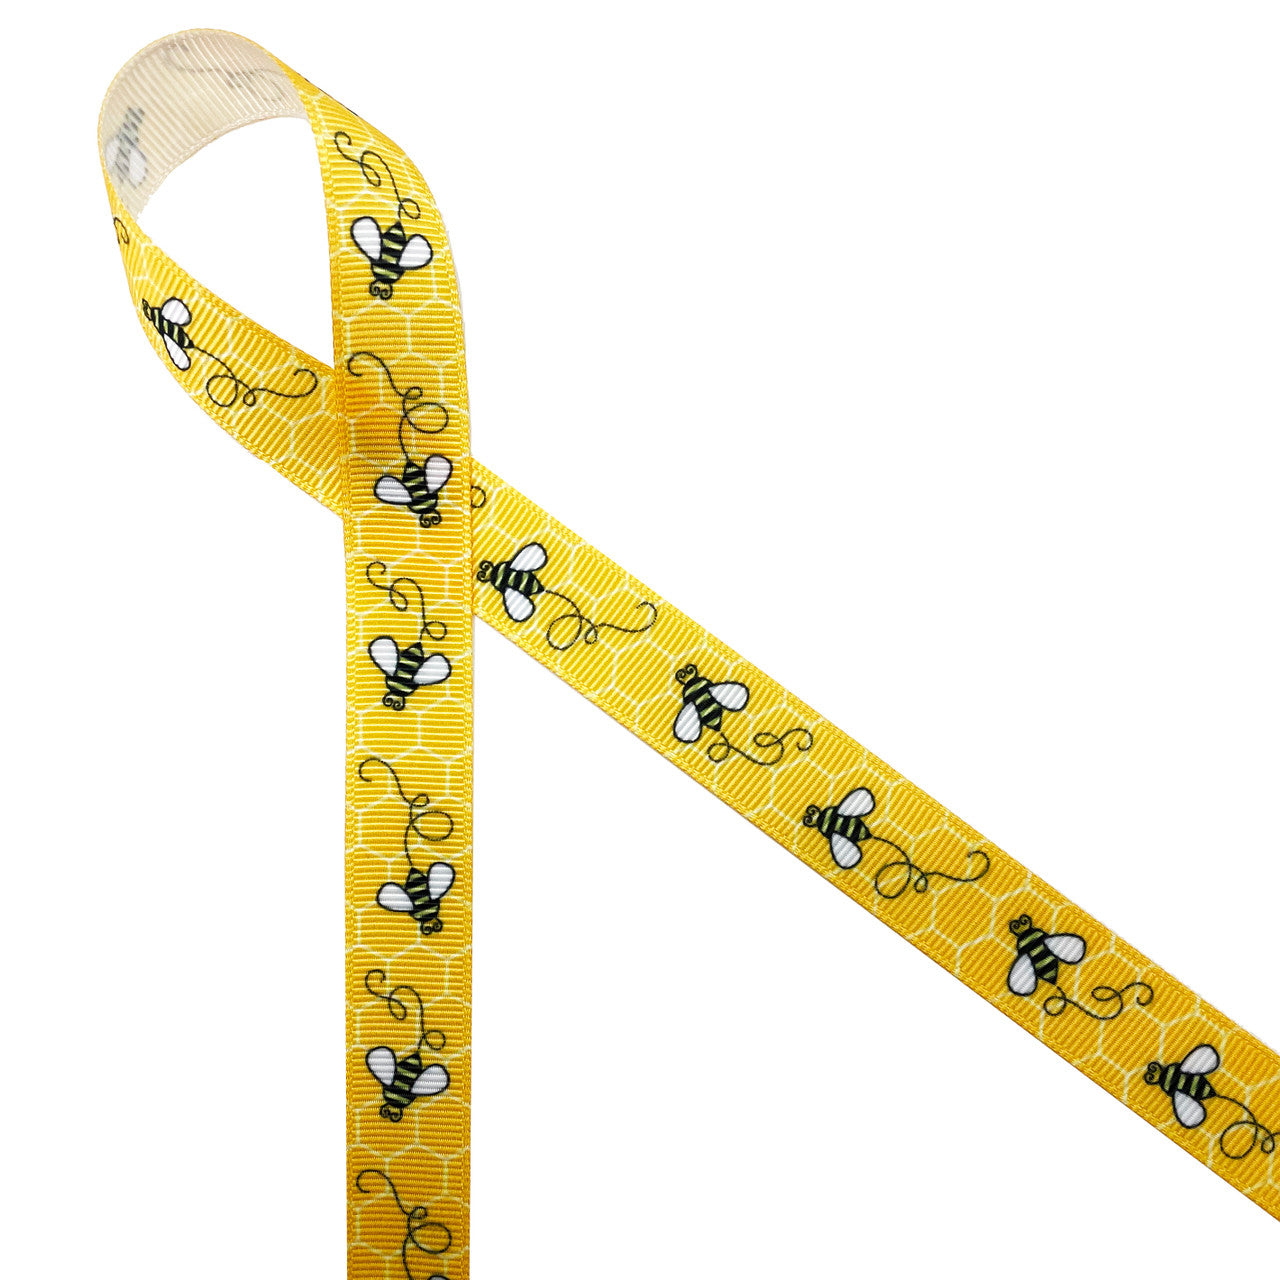 Buzzing bees in black and white on a yellow honeycomb background printed on 5/8" white grosgrain ribbon. This is an ideal ribbon for hair bows, head bands, hat bands and crafts. Use this ribbon for gifts with an apiary theme like honey, bees wax hand creams and lotions and bees wax candles! All our ribbon is designed and printed in the USA